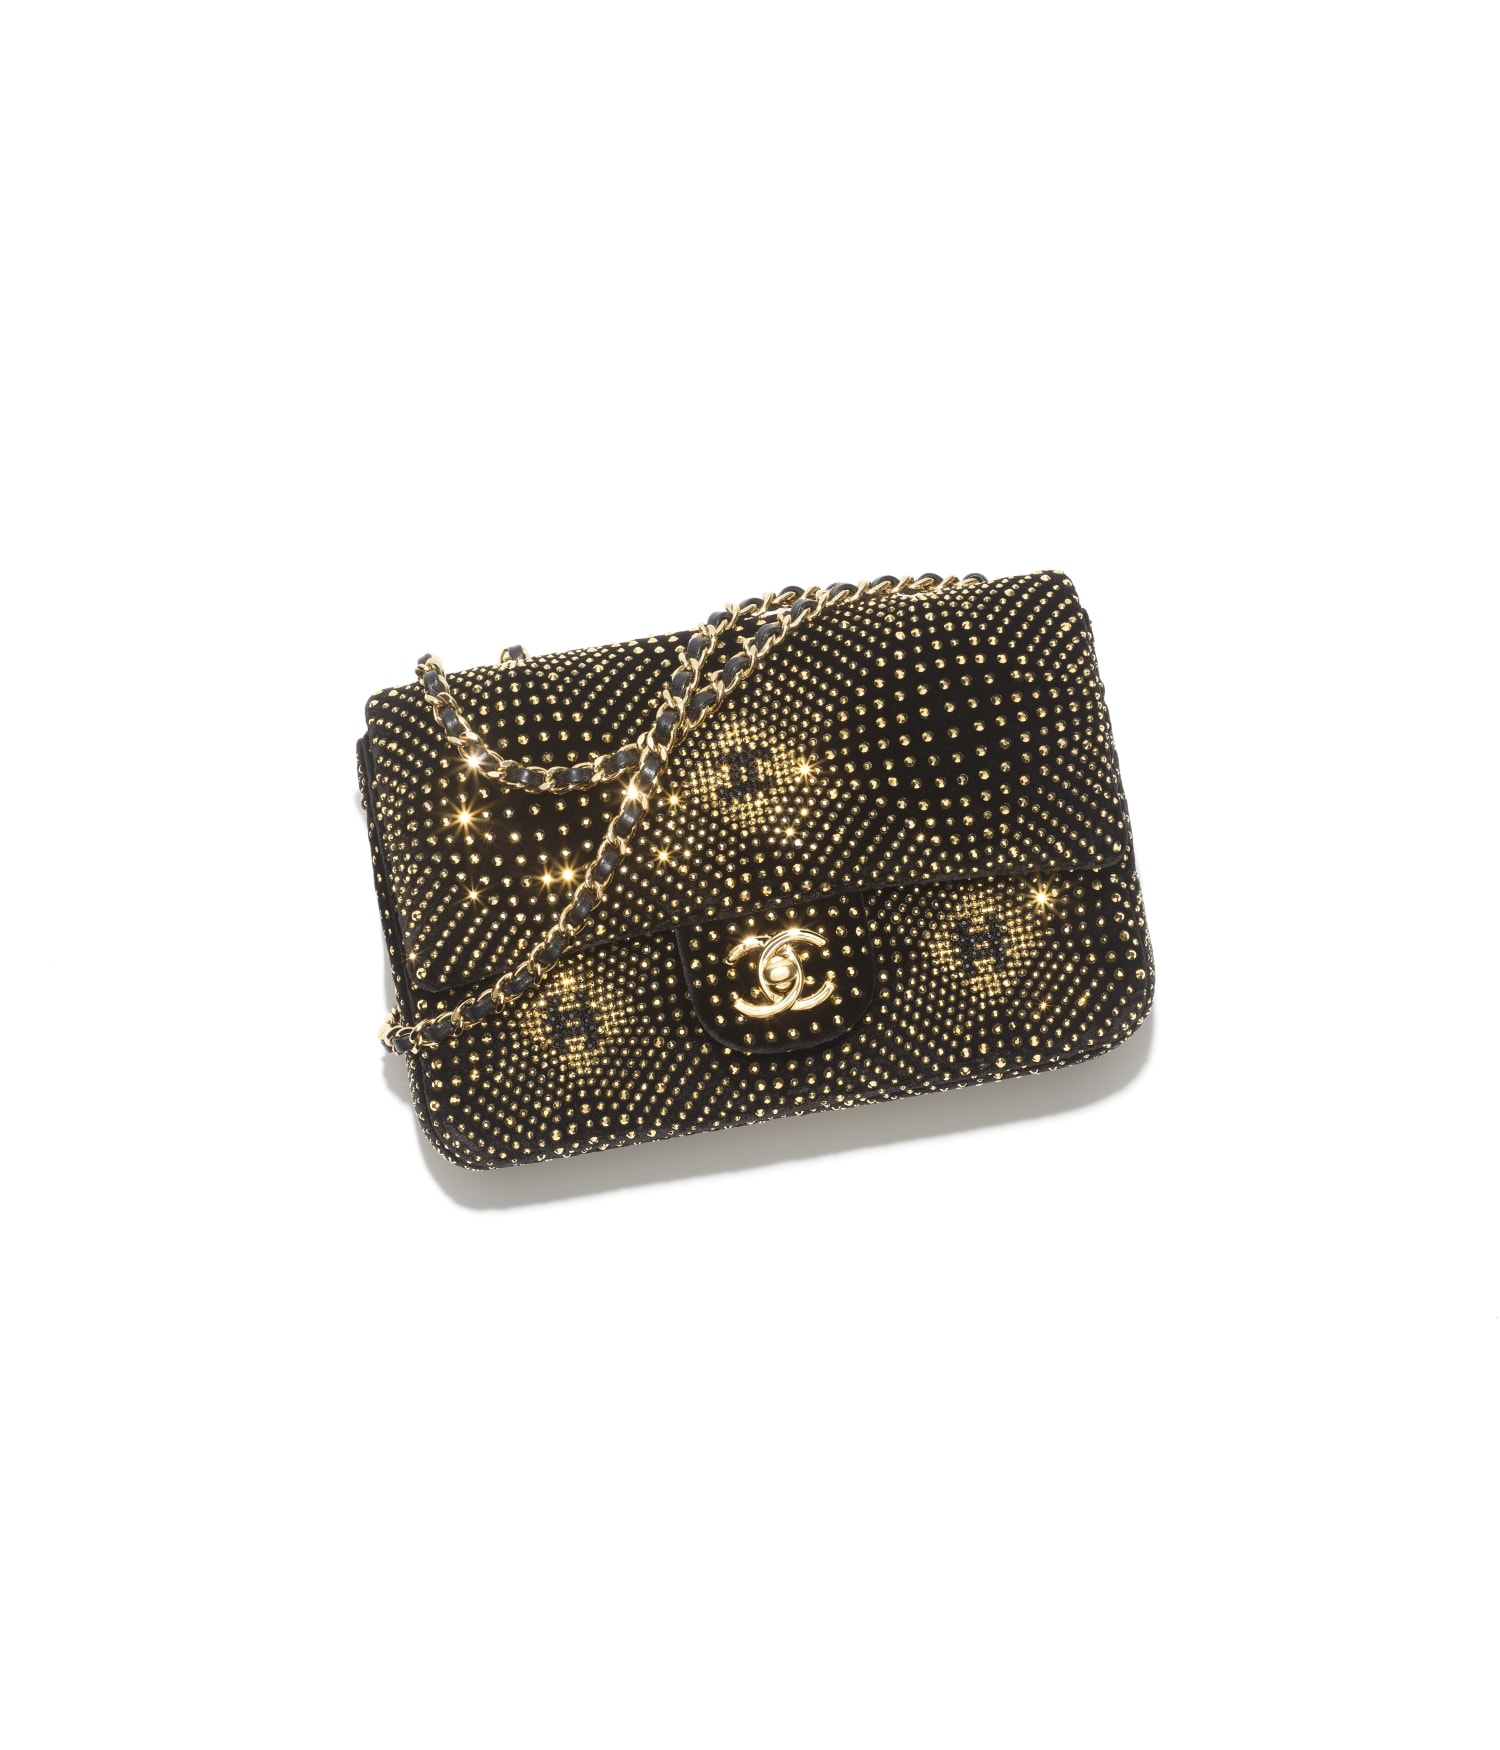 chanel_bag-in-black-velvet-gold-strass-and-metal-as4297-b14948-nt392-hd-LD